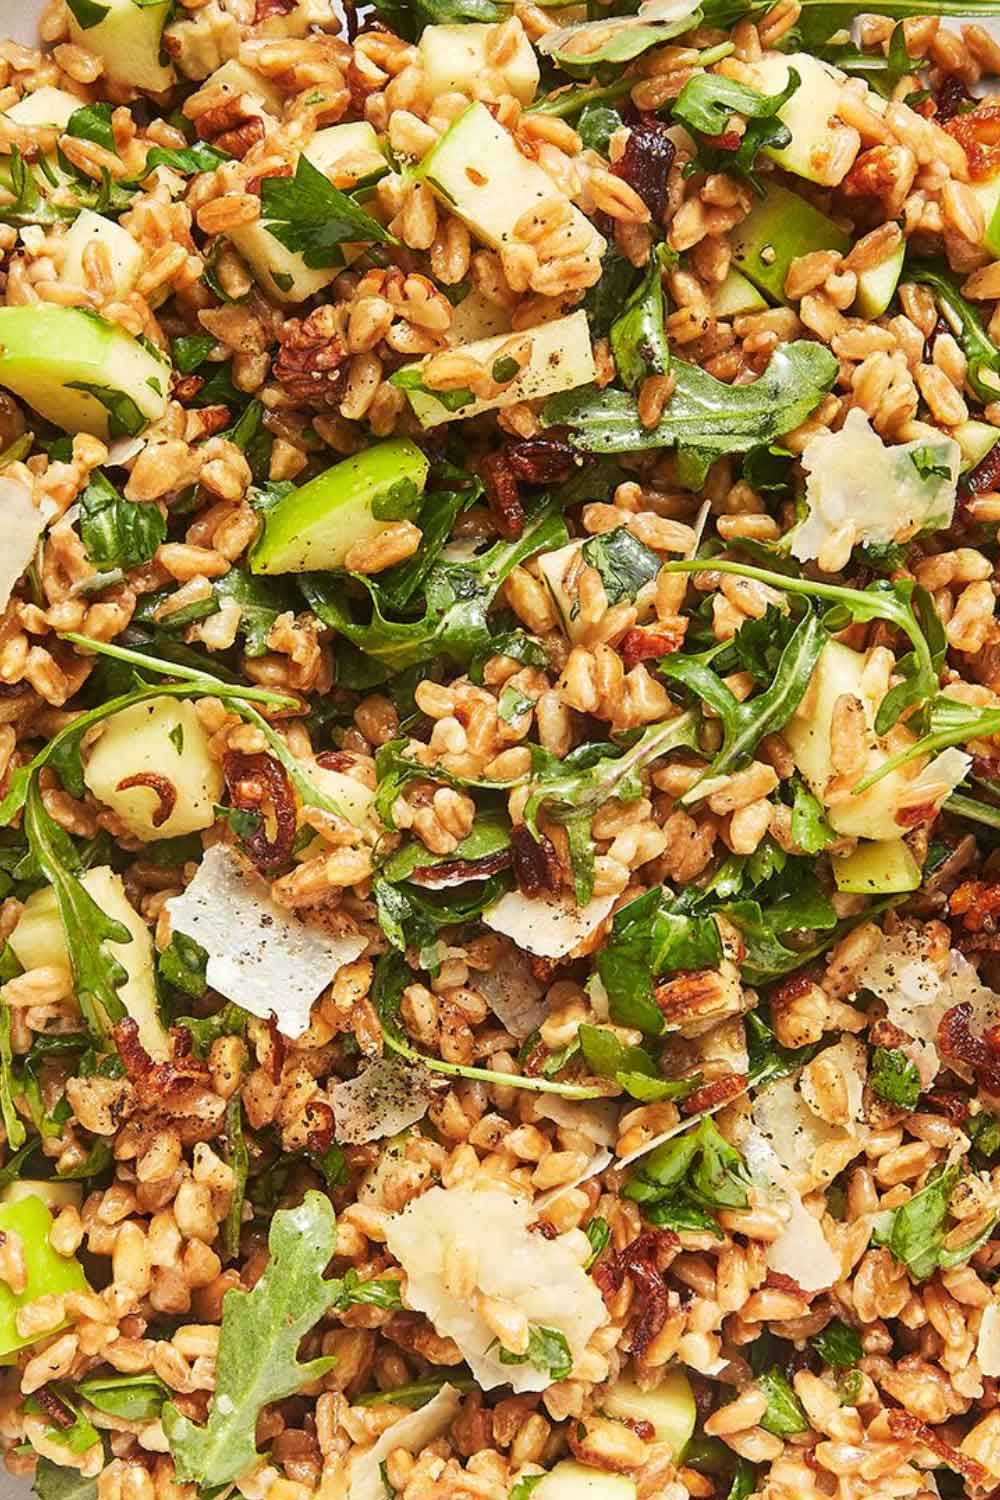 Grain Salad with Trout, Almonds, and Herbs